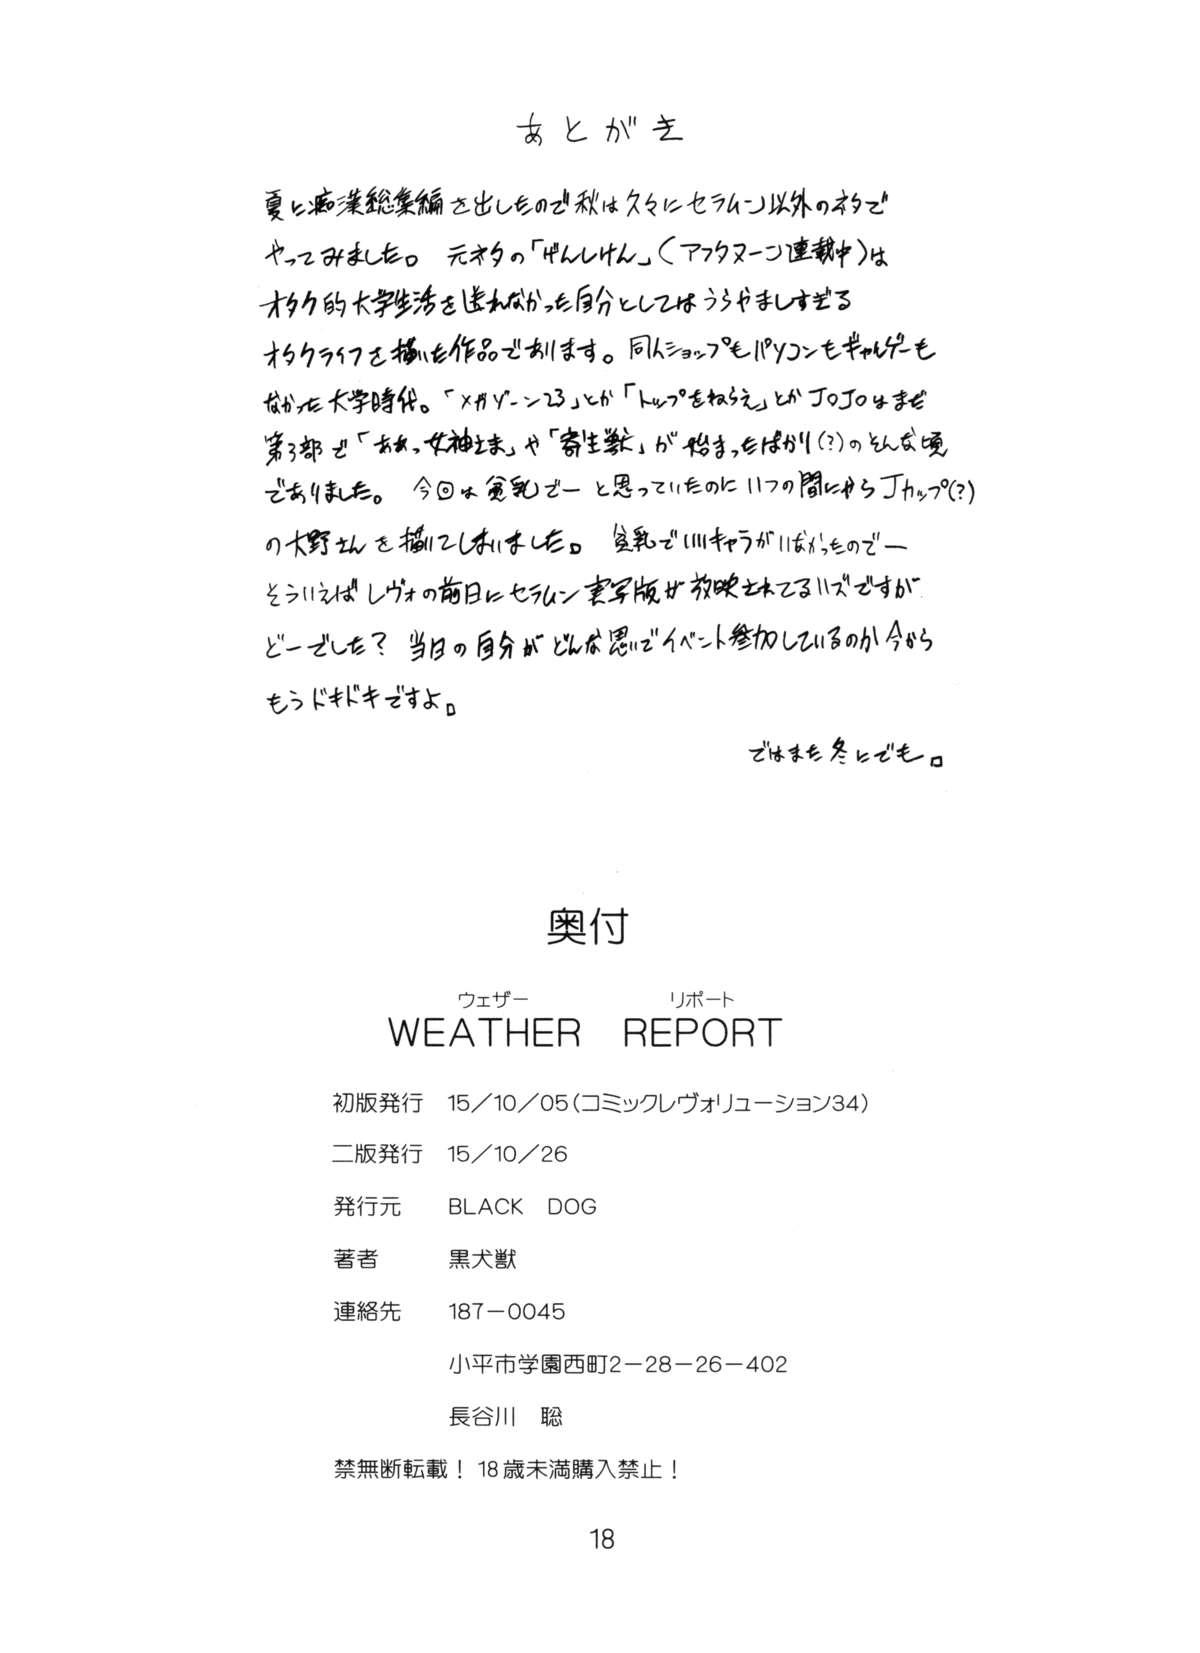 WEATHER REPORT 16